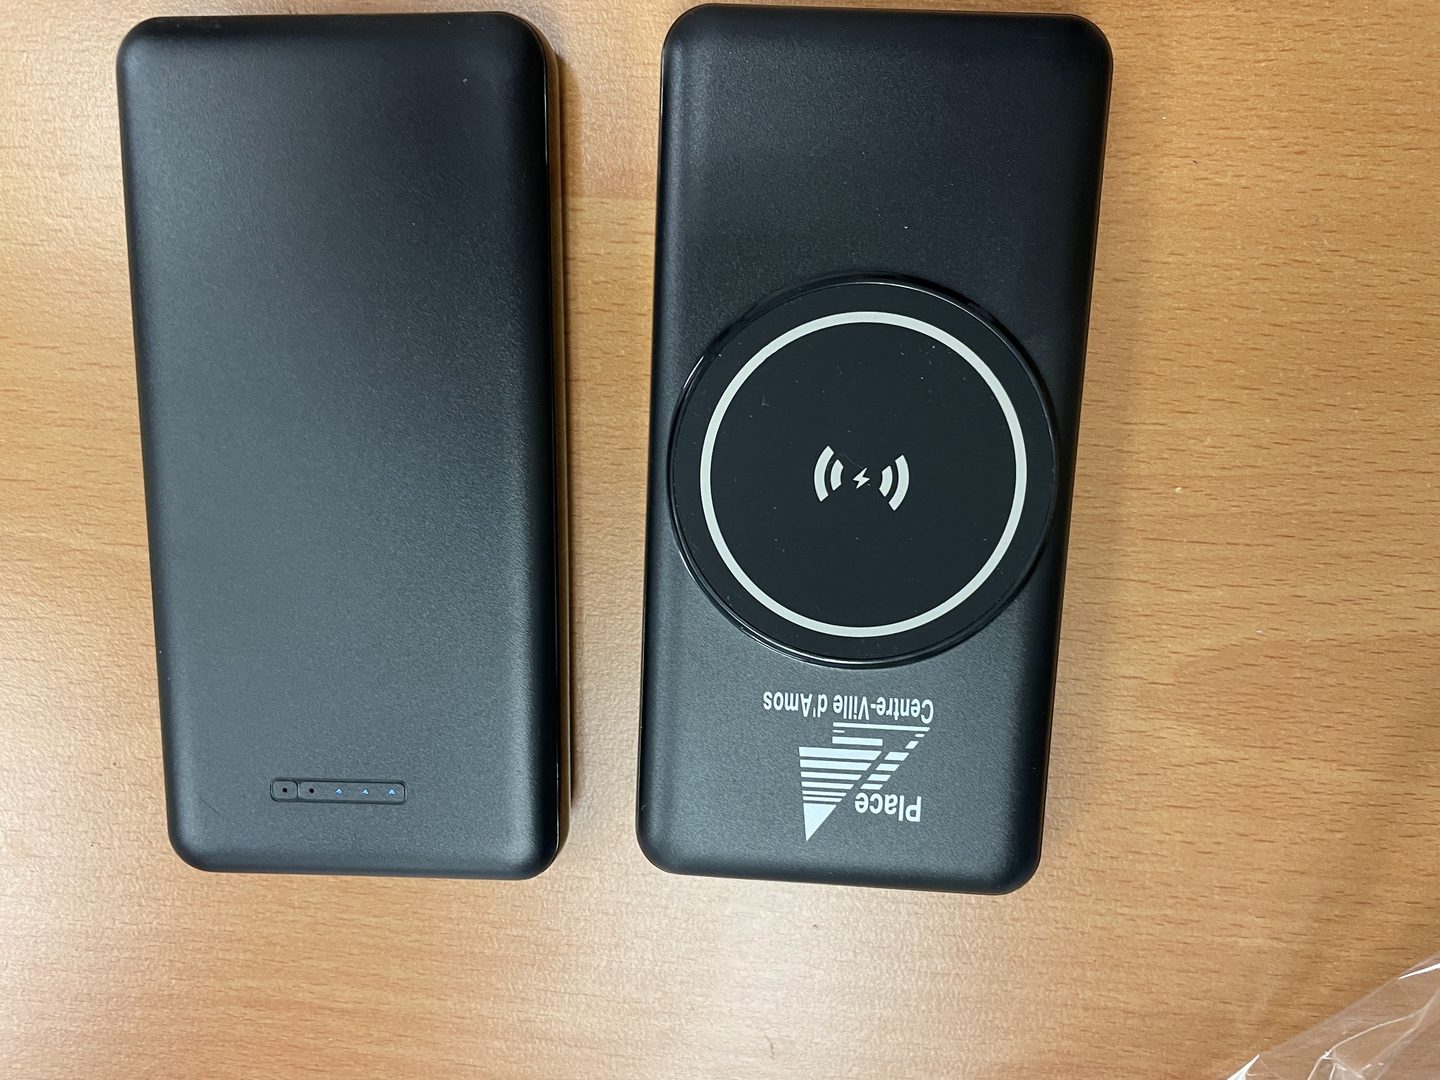 Two Black Wireless Power Bank placed in the desk